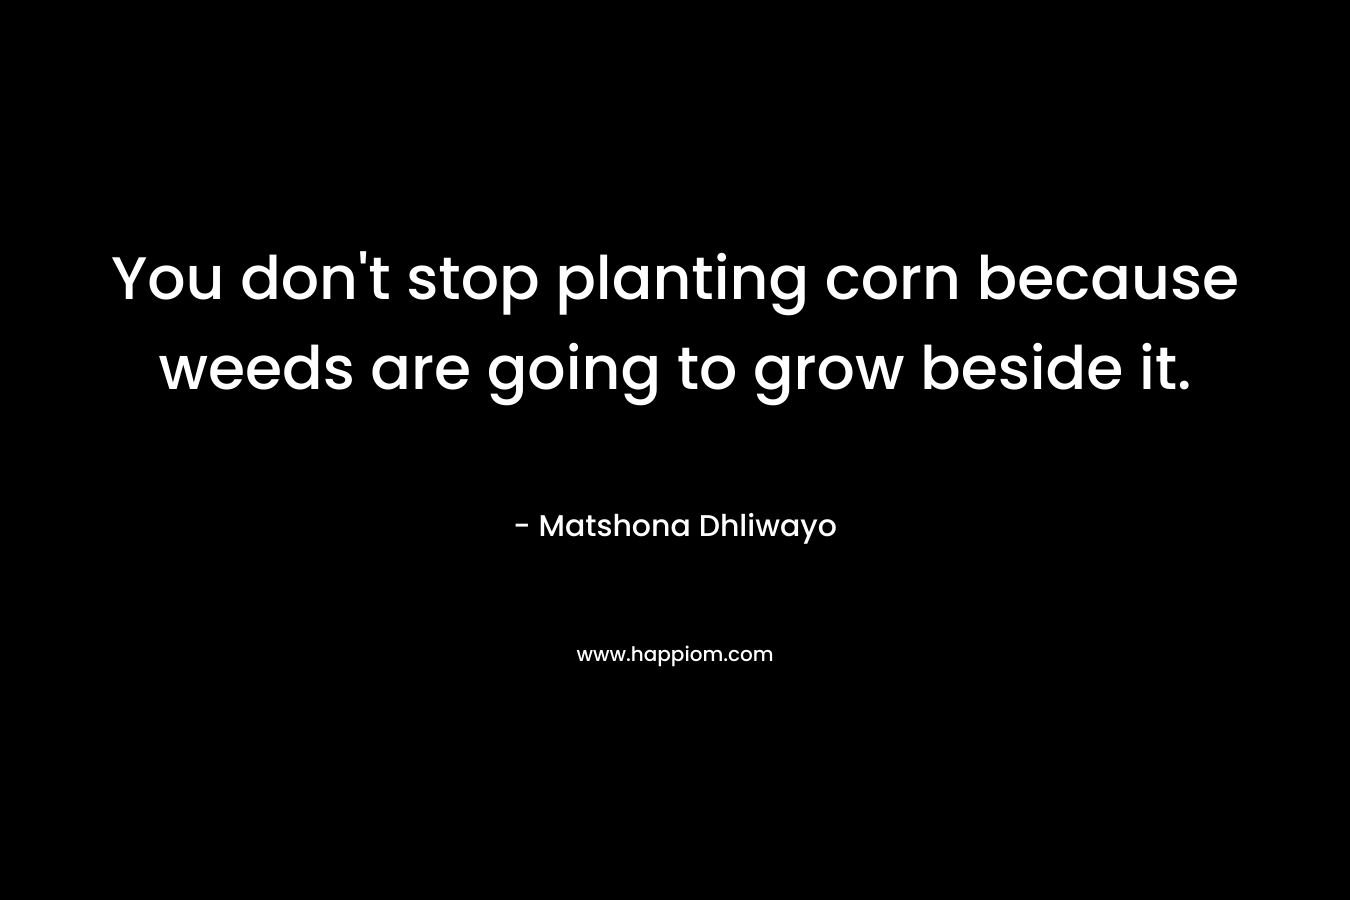 You don’t stop planting corn because weeds are going to grow beside it. – Matshona Dhliwayo